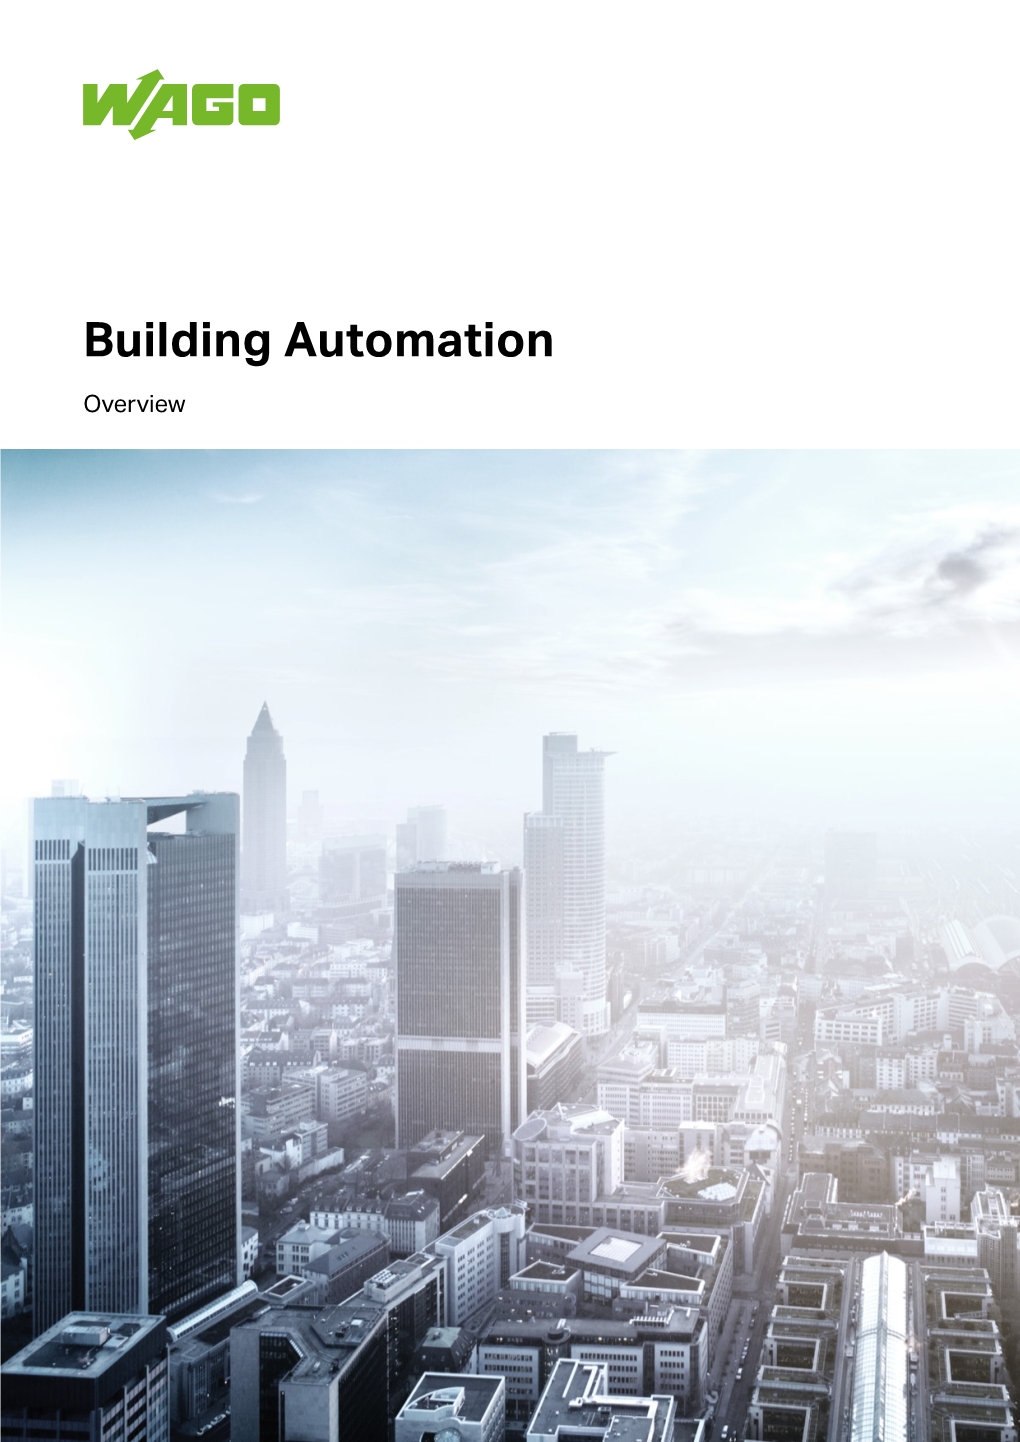 Building Automation Overview